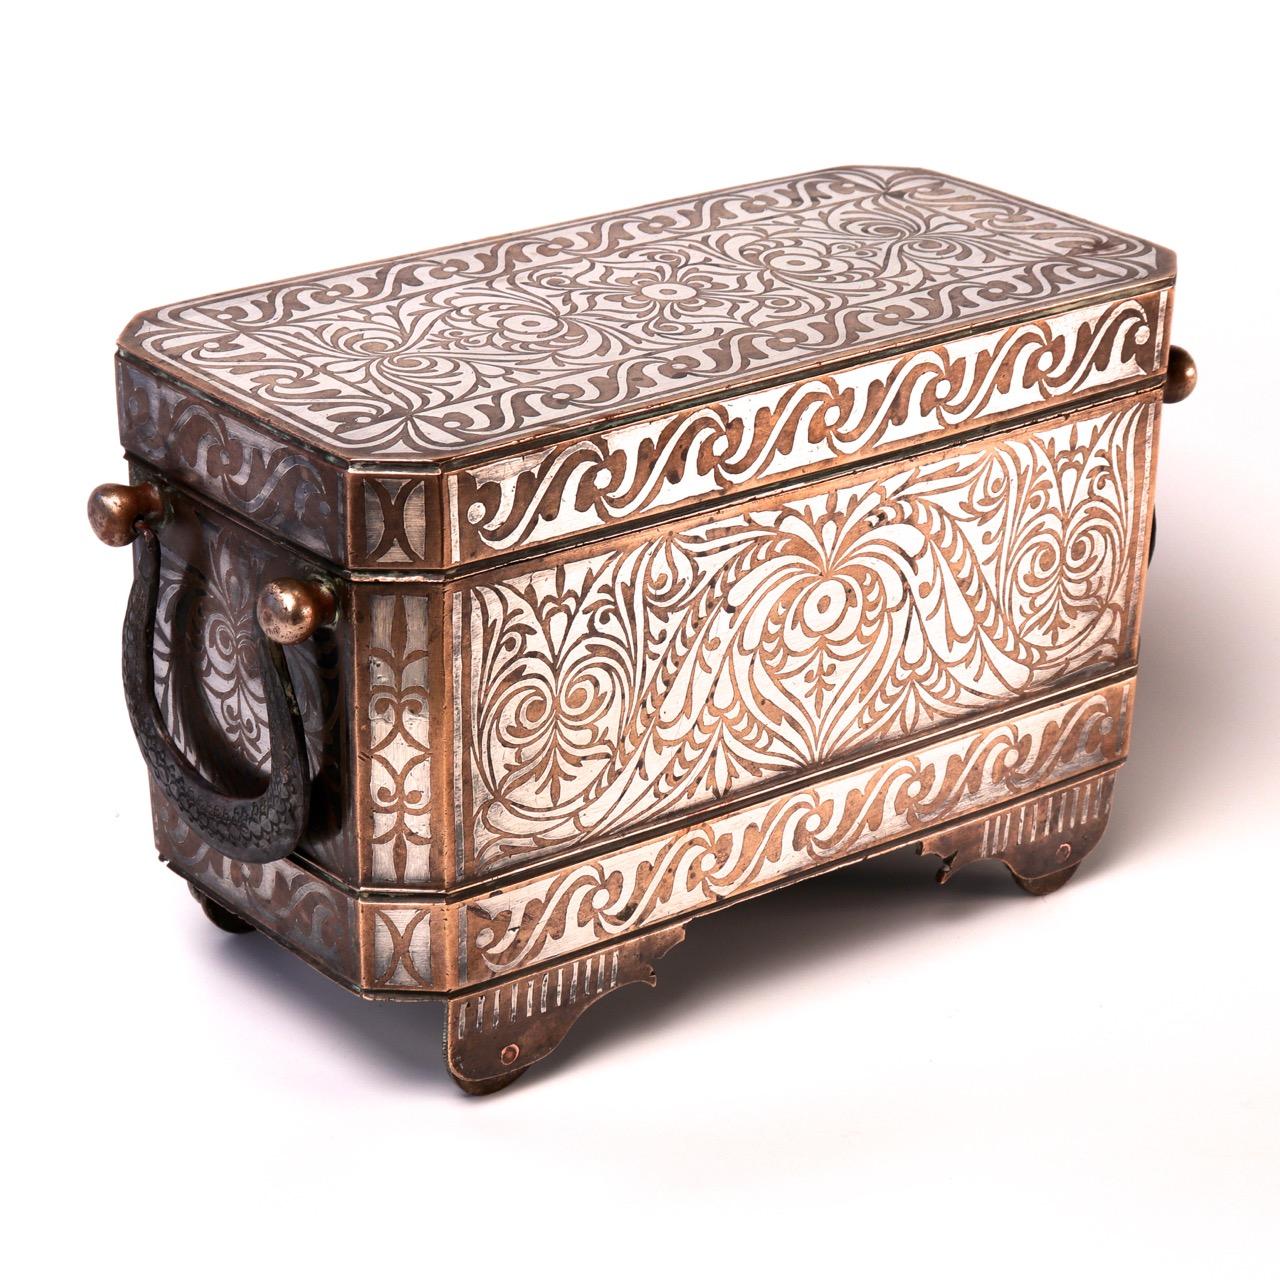 Southern Philippine (Mindanao) brass with silver inlay betel box, a large and heavy size with wheels, the rectangular body with hinged lid, supported on four wheeled feet, the silver inlay on the sides, chamfered corners and lid are in the tendril